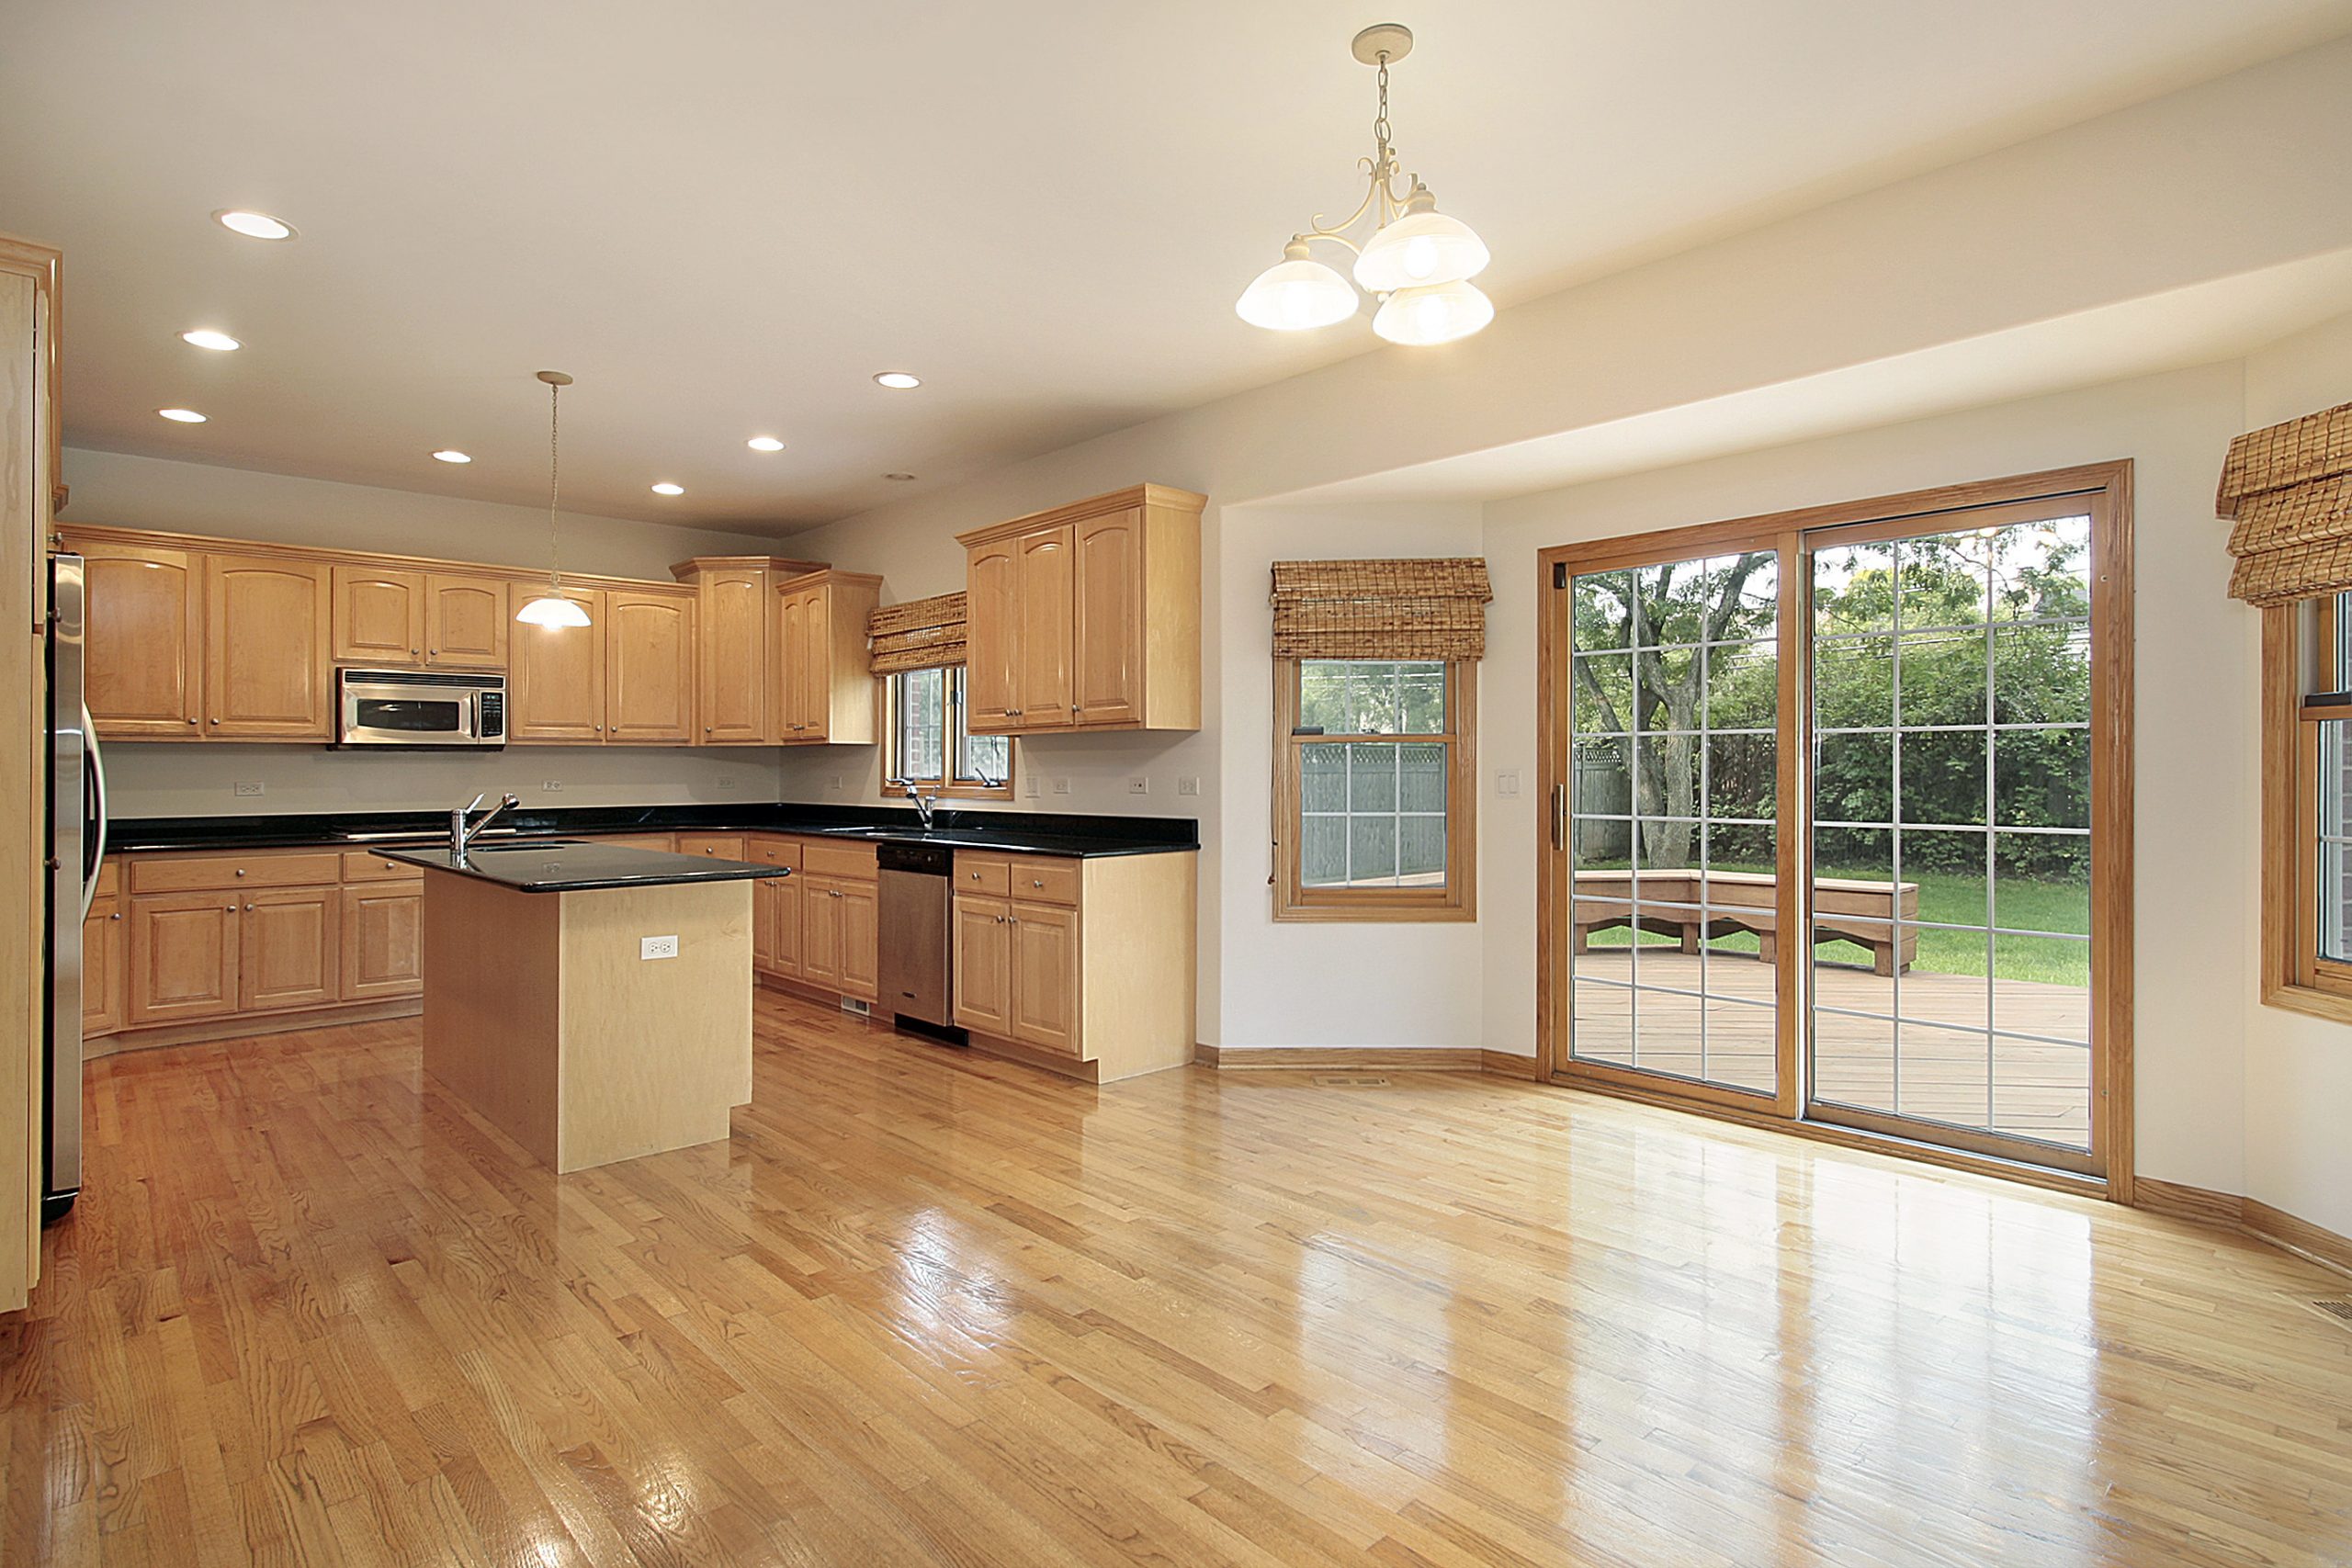 wooden floor and kitchen cabinets